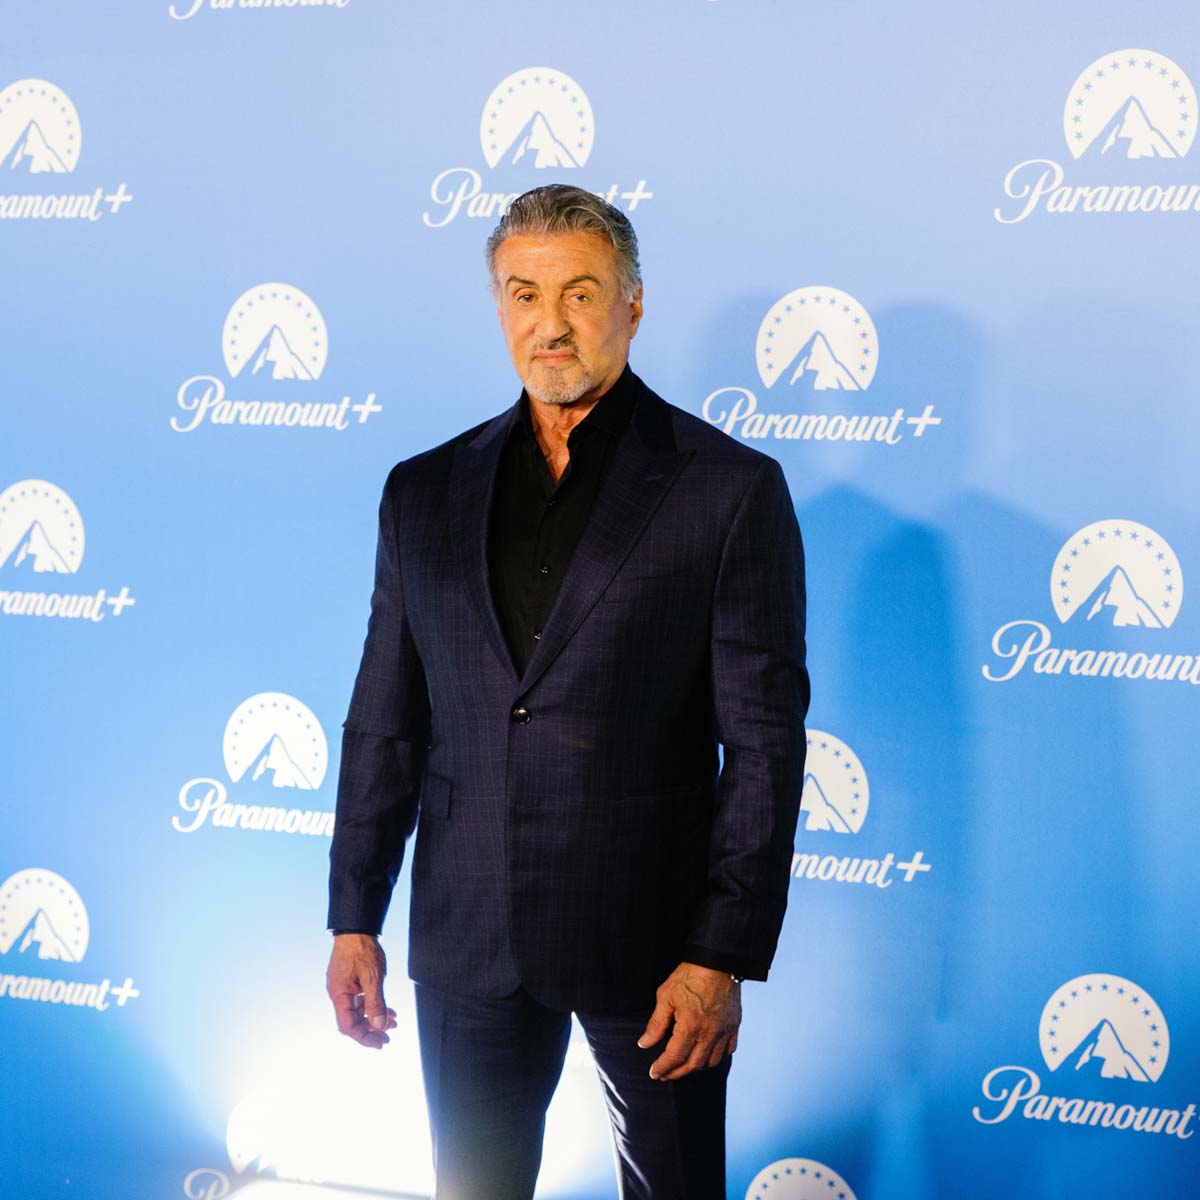 Paramount+, the Italian launch of new streaming service at the Cinecittà Studios in Rome. Sylvester Stallone was the special guest of the night